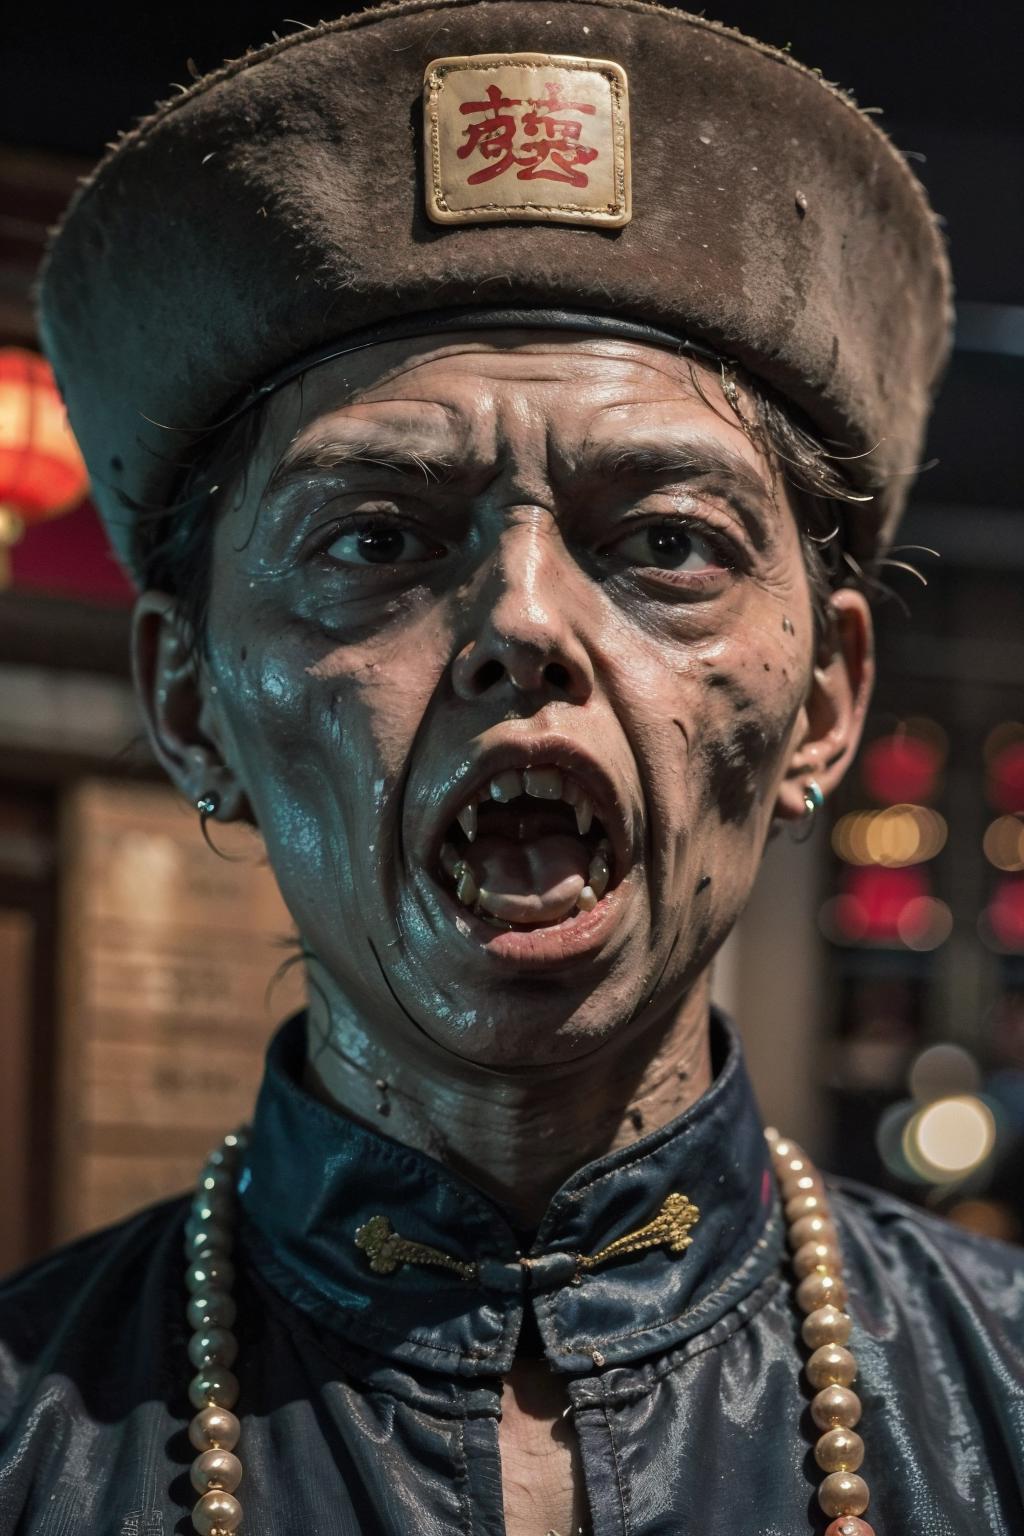 Chinese Qing Zombie - (清代殭屍) image by ssugar008